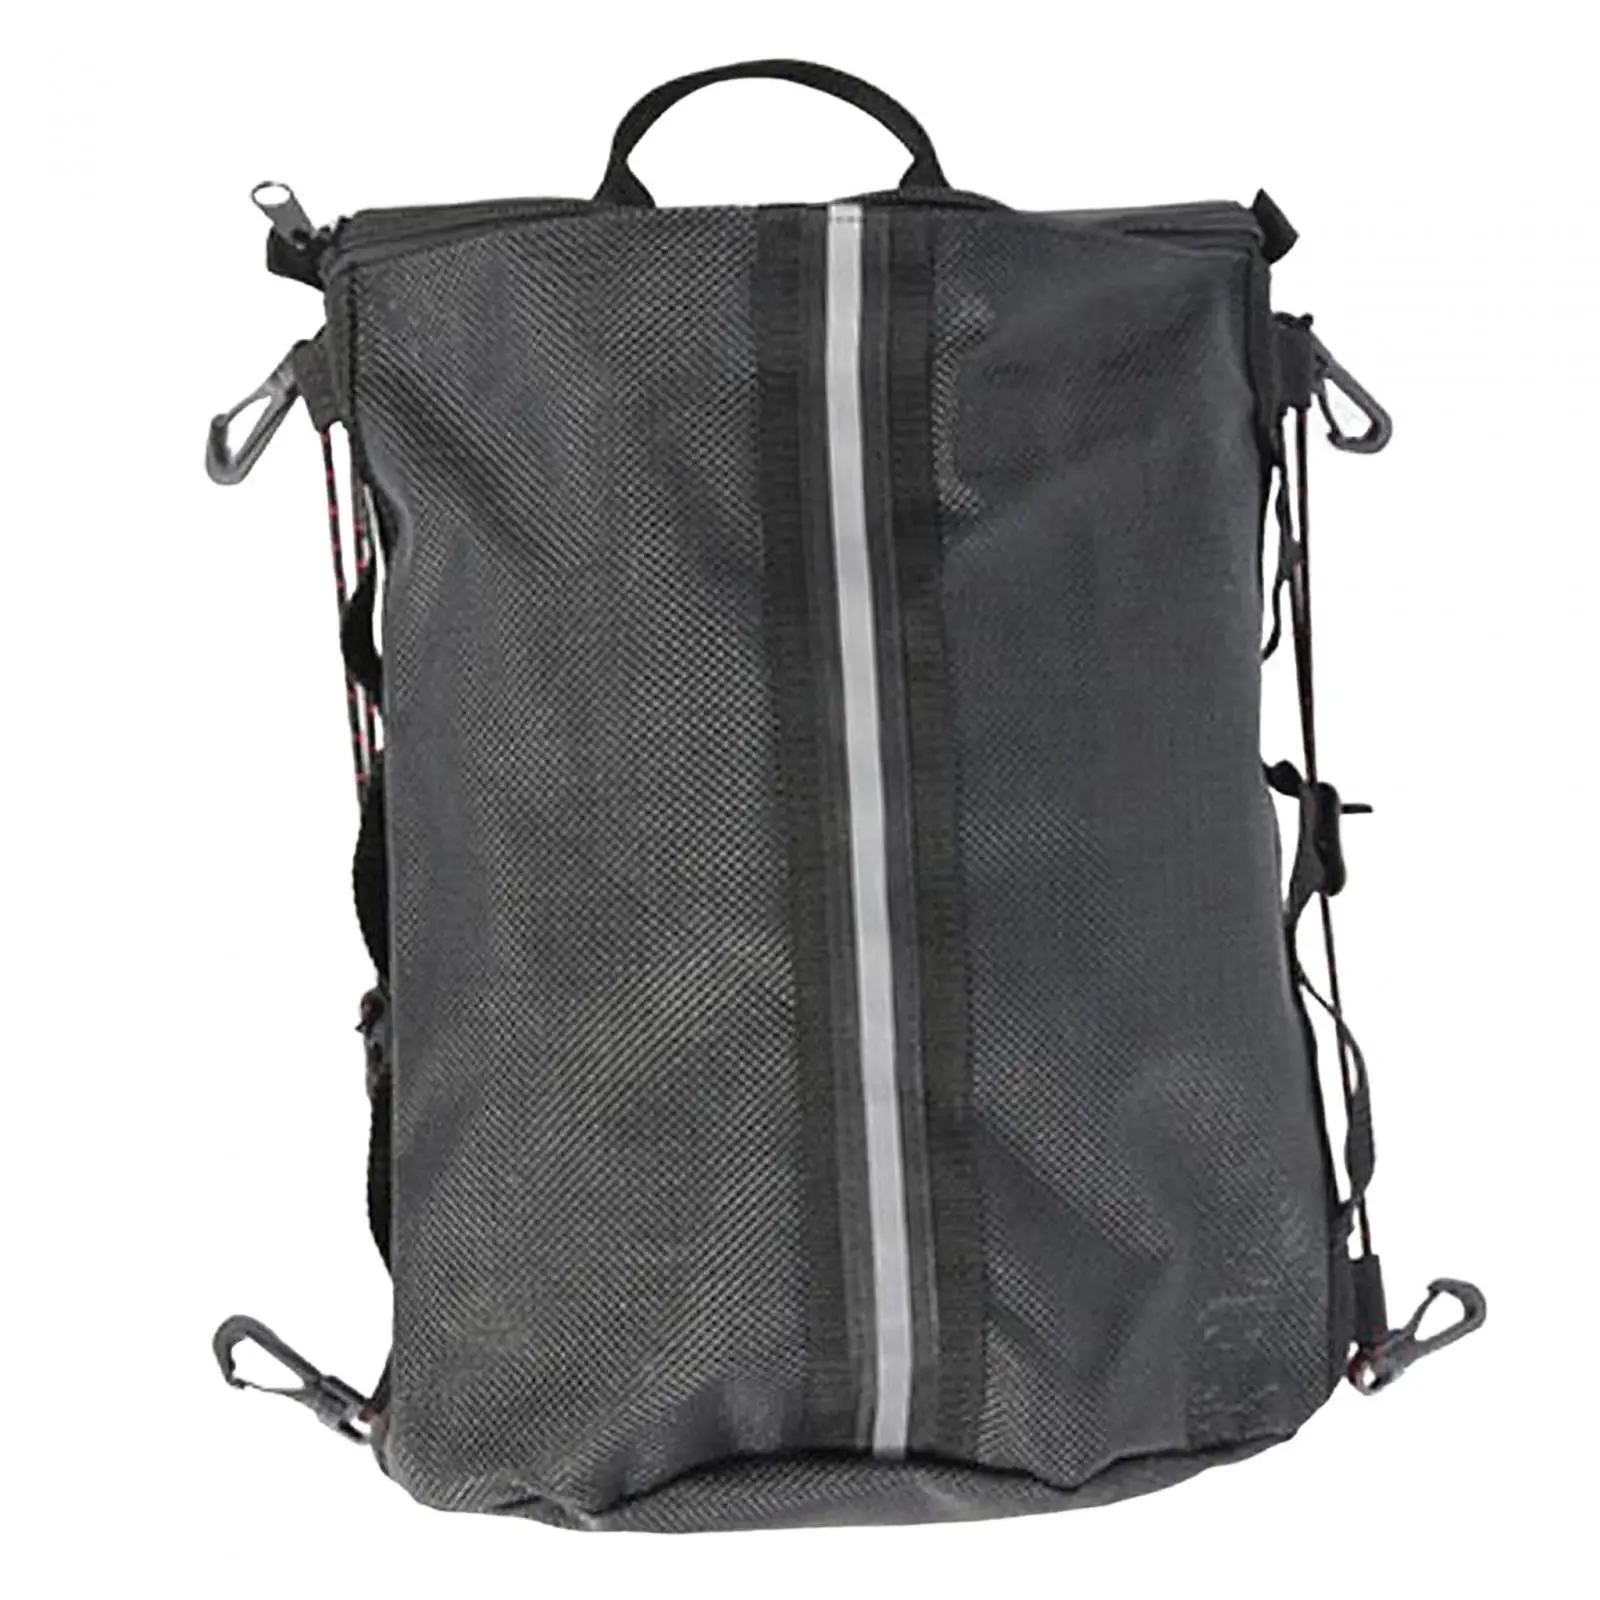 Portable Paddle Board Deck Bag Mesh Storage Bag Water Sports Accessories pc Organizer for Kayak Boat Canoe Surfboard